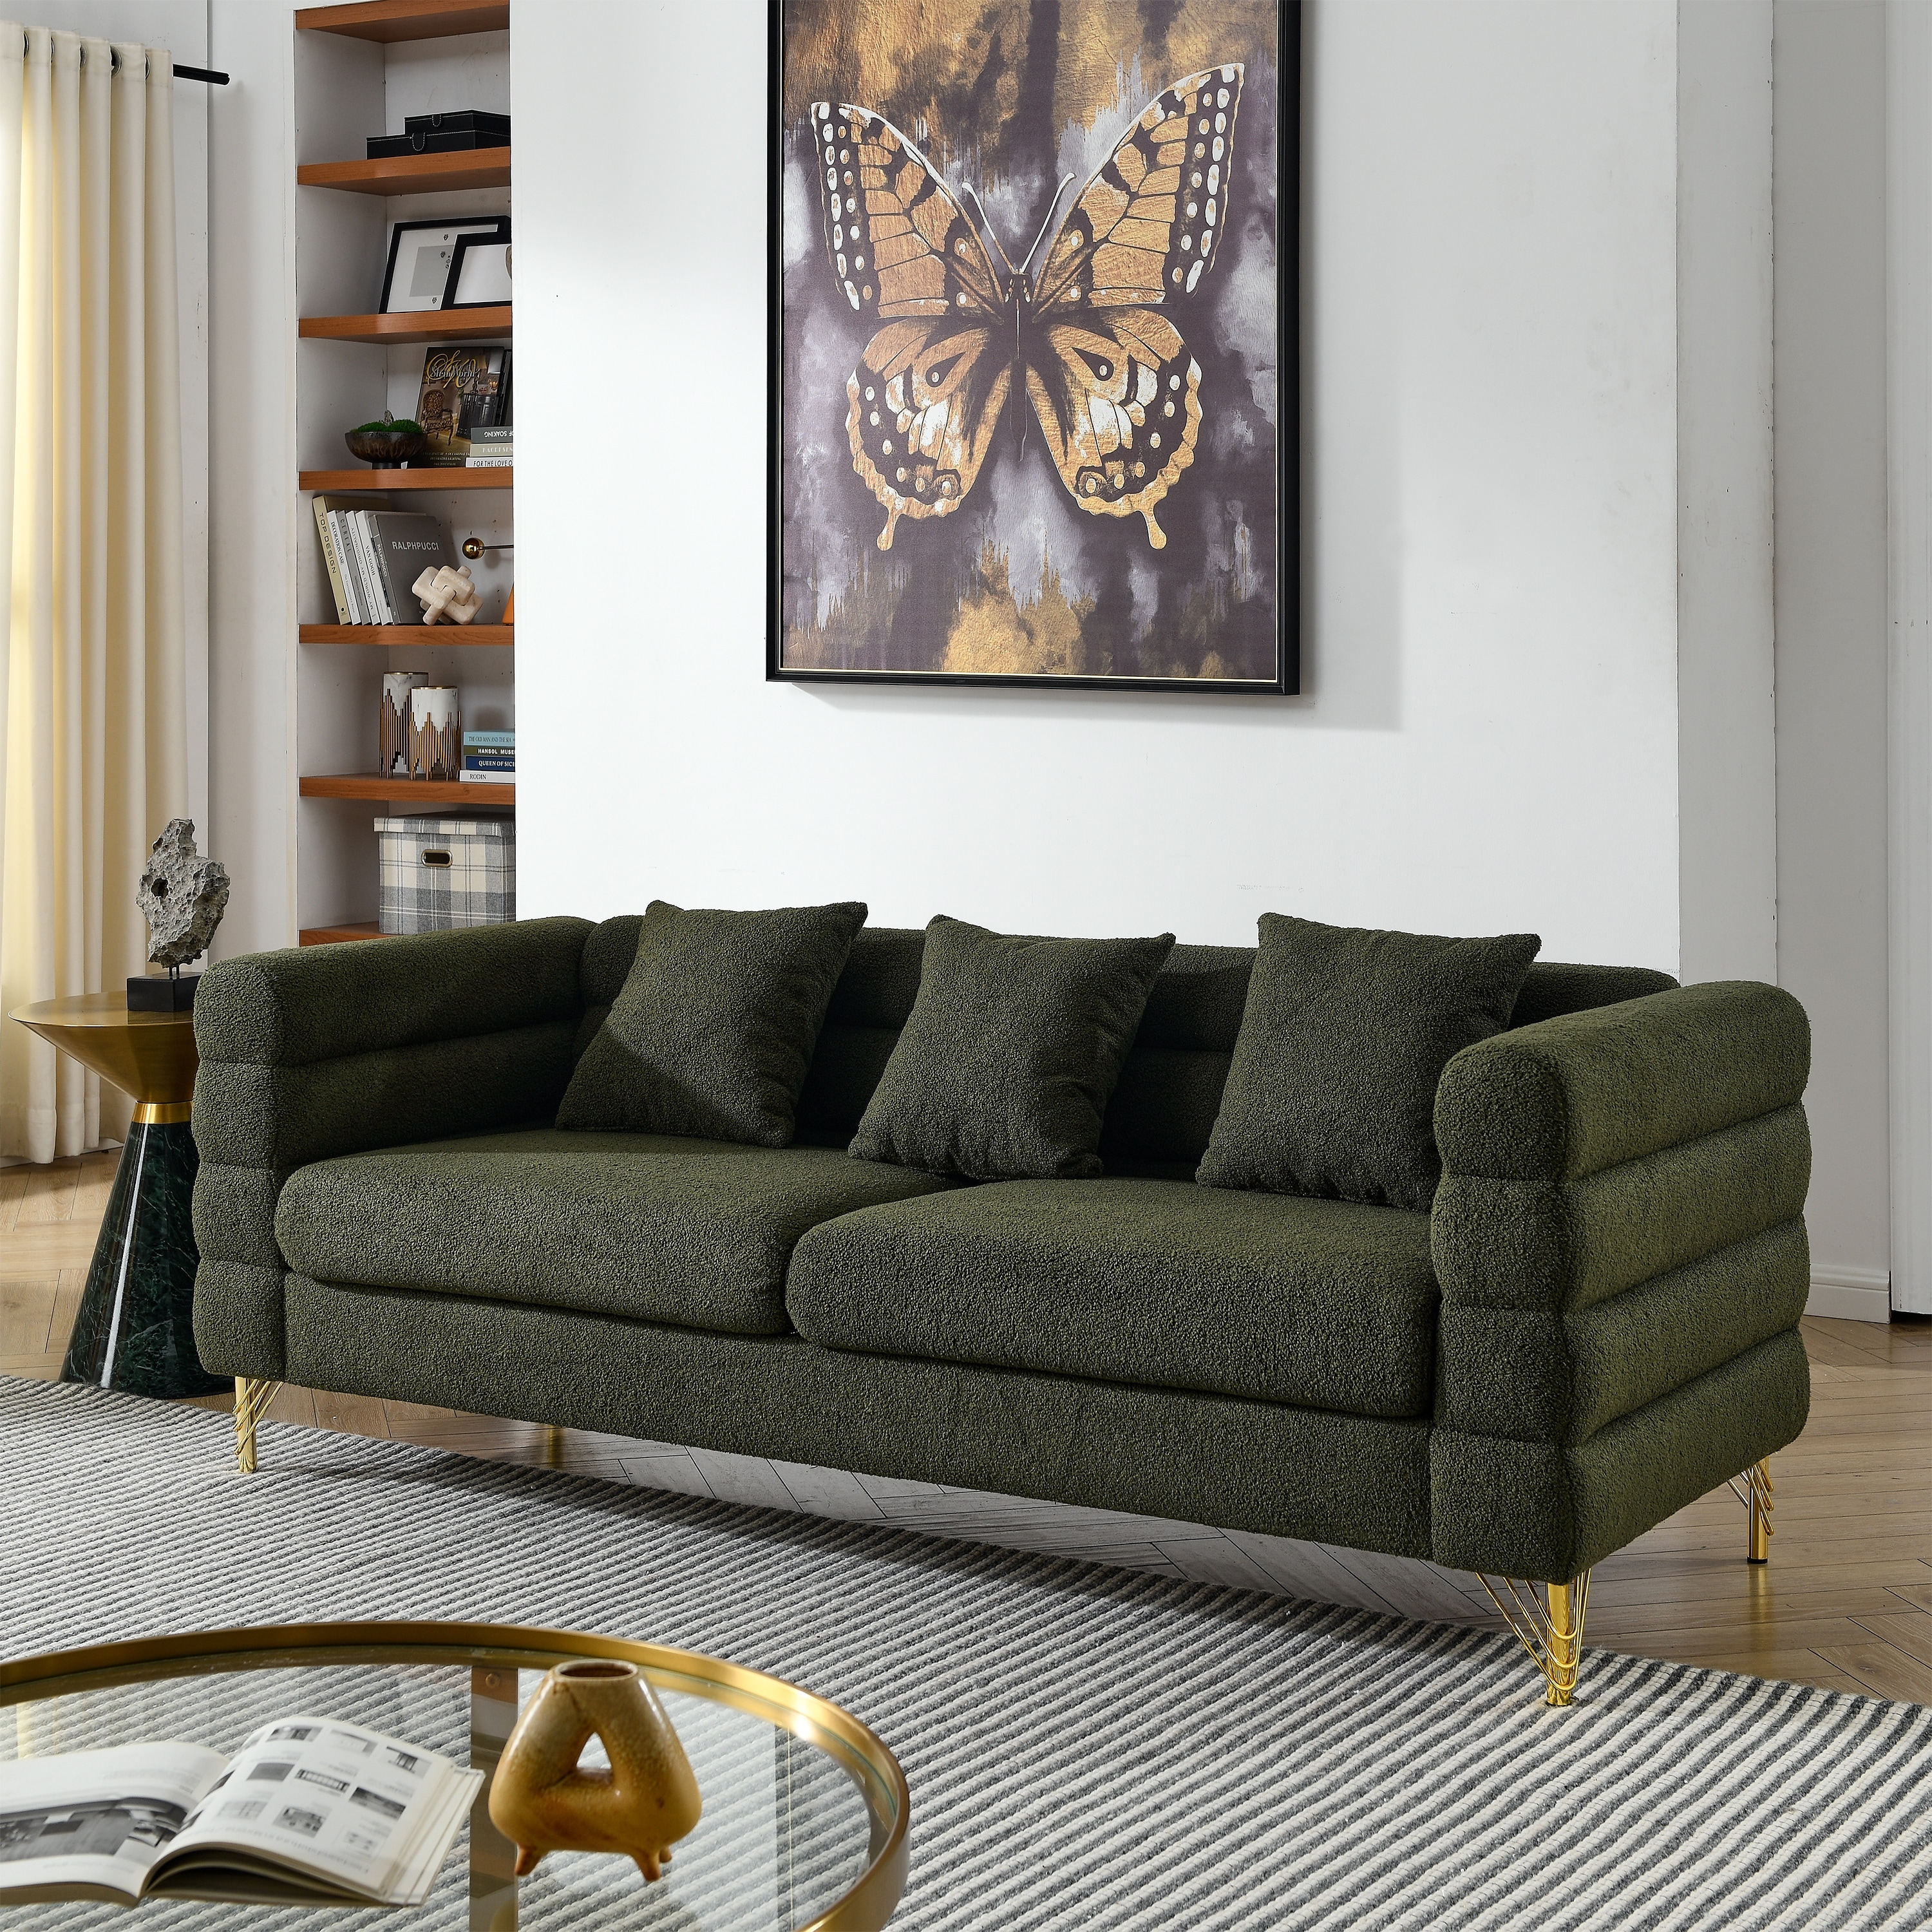 https://ak1.ostkcdn.com/images/products/is/images/direct/34c296b7392ae185be6c89e2a6066e475a467cf6/Modern-Streamline-3-Seat-Sofa-with-Lumbar-Support.jpg